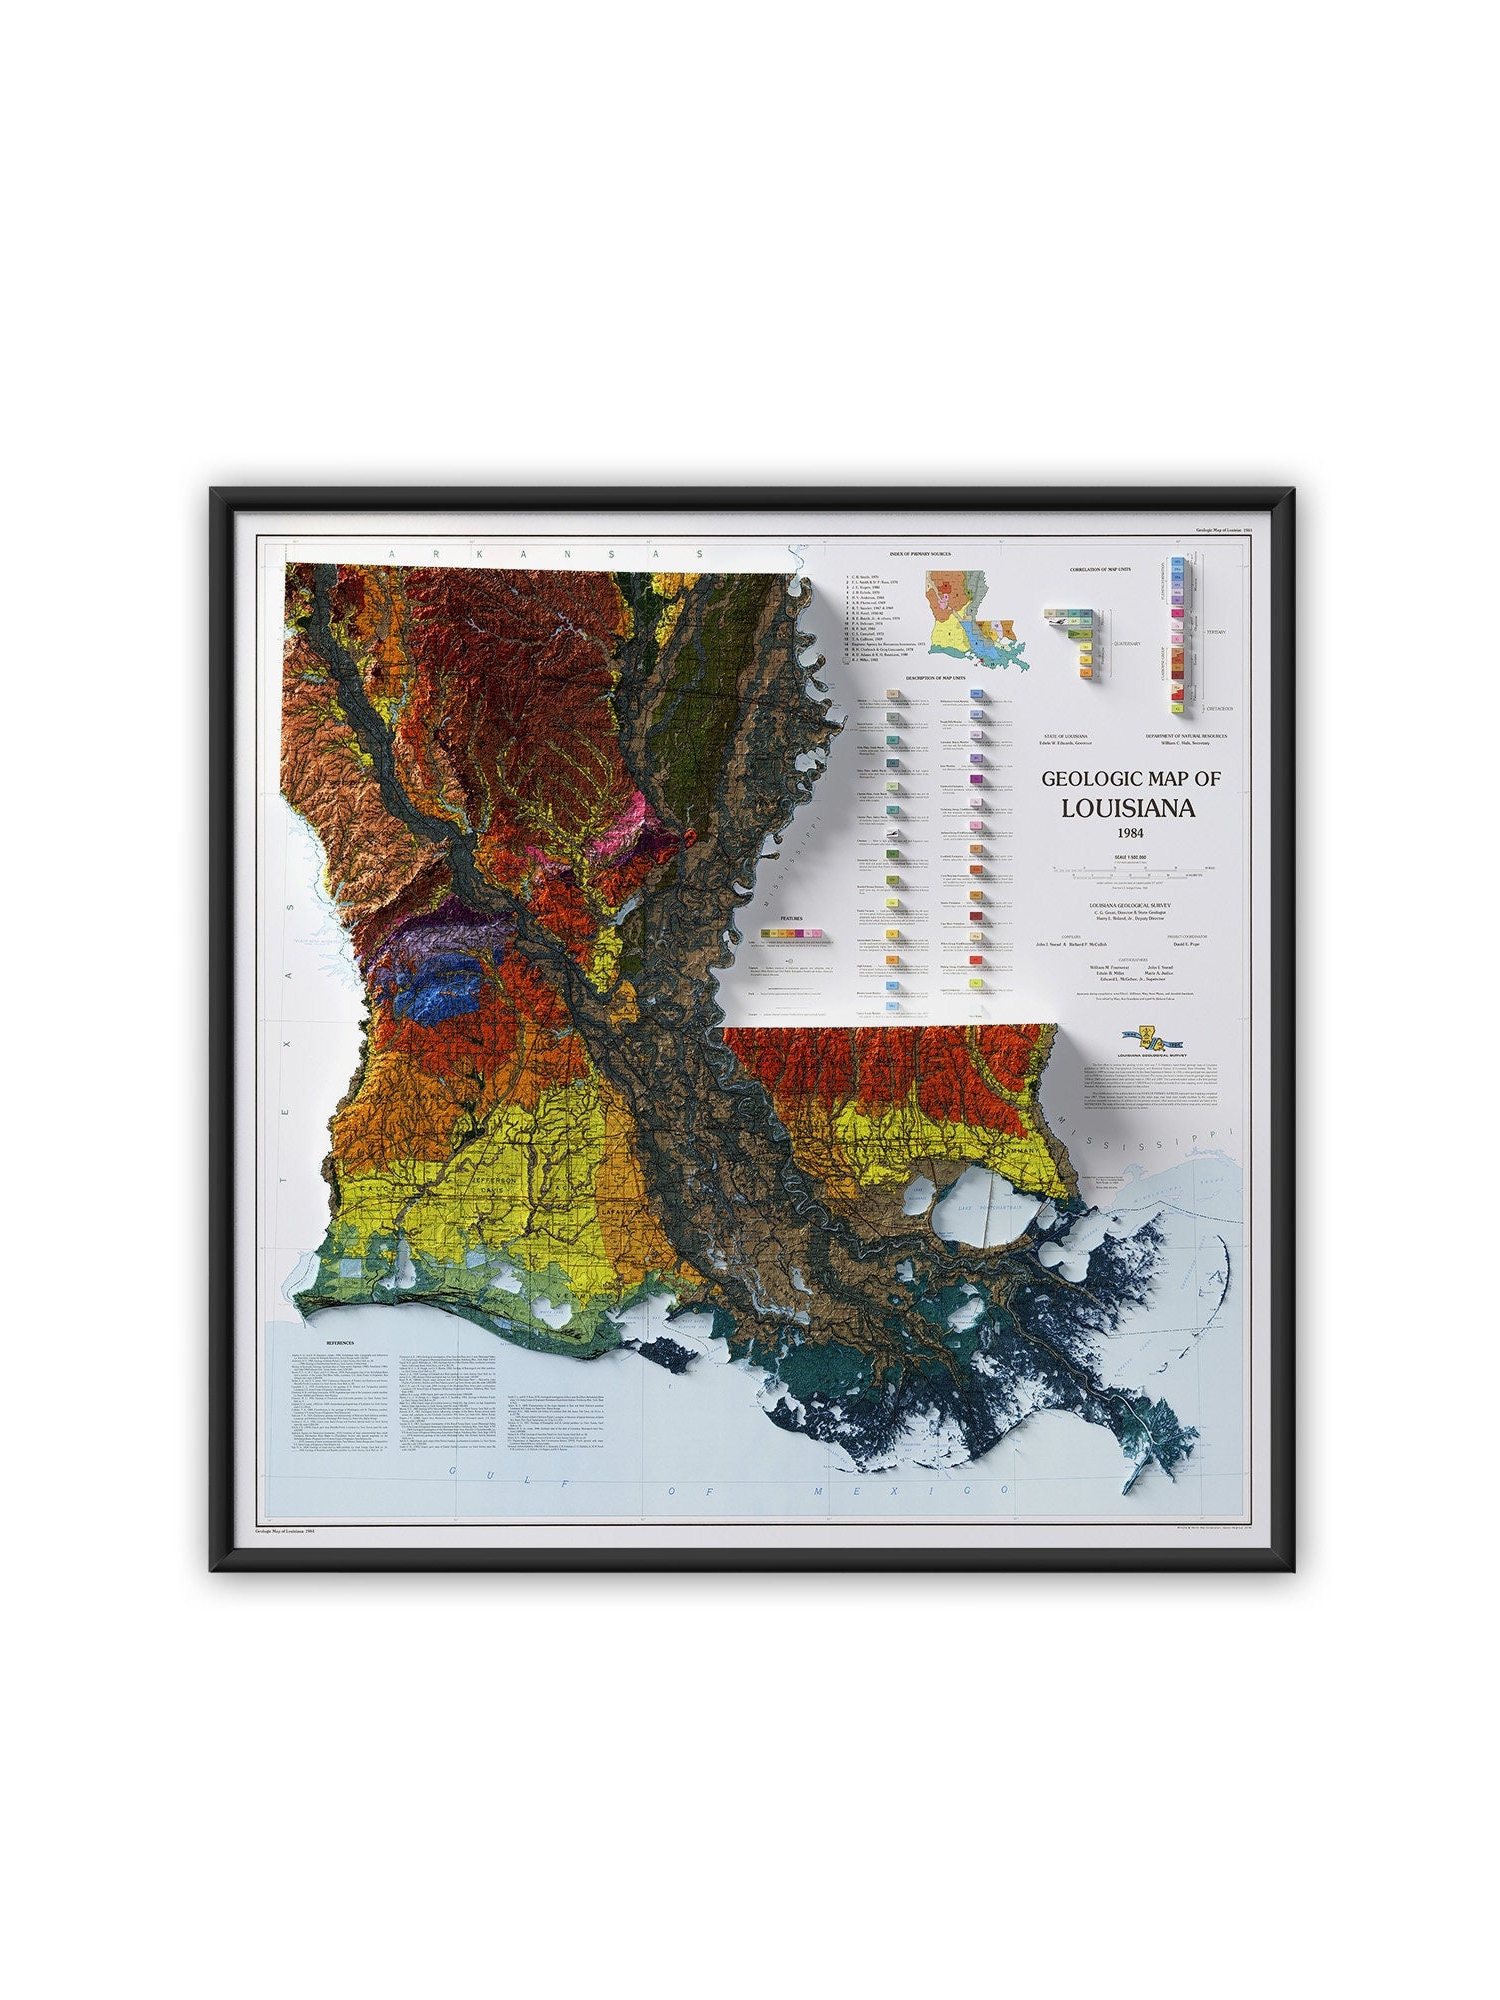 60 x 45 Giant Louisiana State Wall Map Poster with Counties - Classroom  Style Map with Durable Lamination - Safe for Use with Wet/Dry Erase Marker  